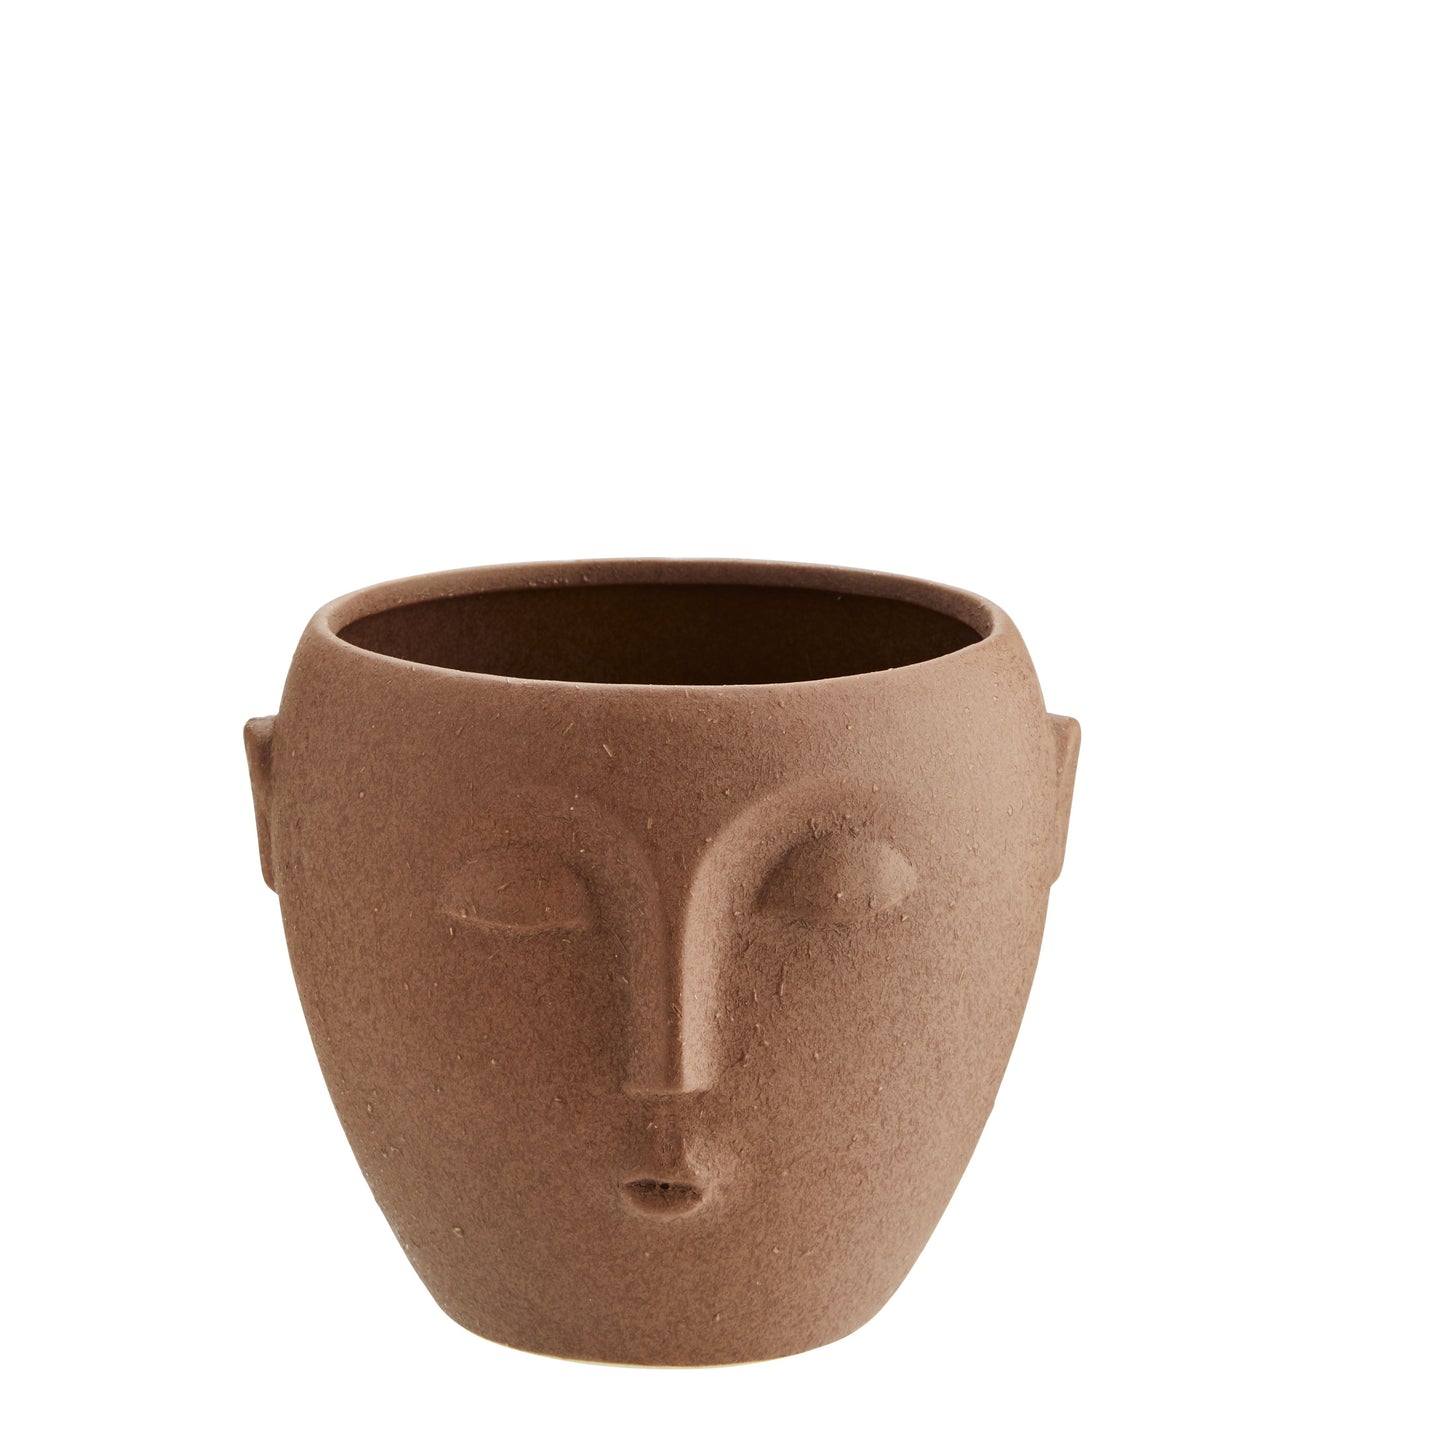 Terracotta Plant Pot with Face Imprint - The Bristol Artisan Handmade Sustainable Gifts and Homewares.